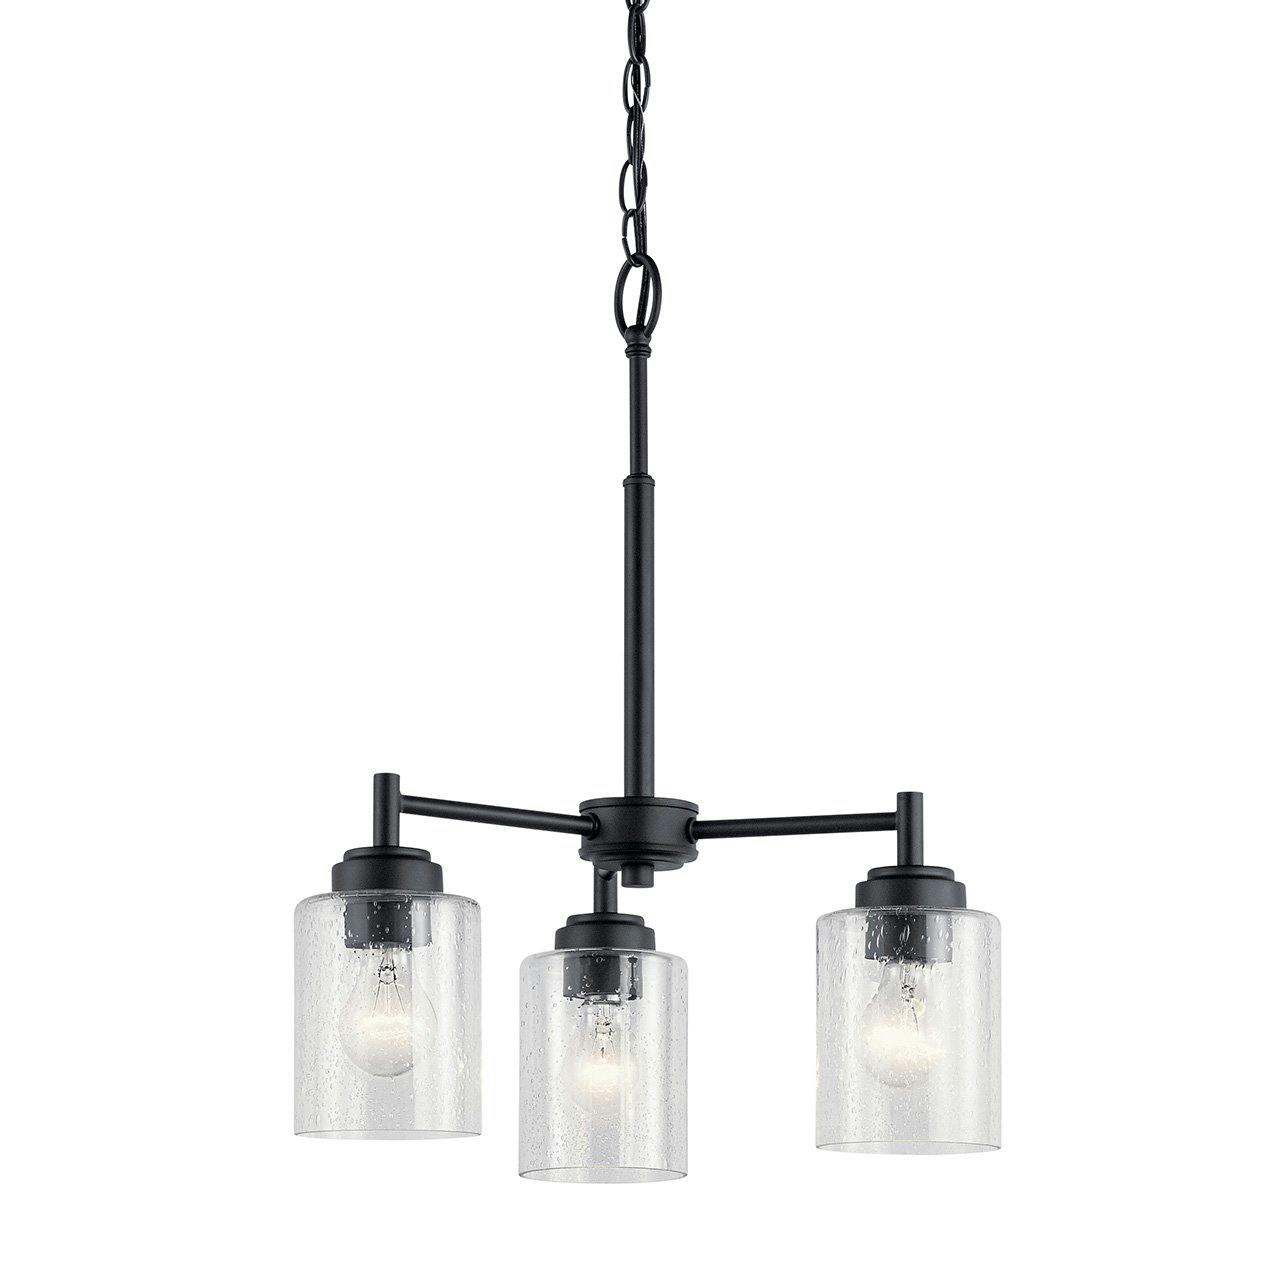 Winslow™ 3 Light Mini Chandelier Black without the canopy on a white background